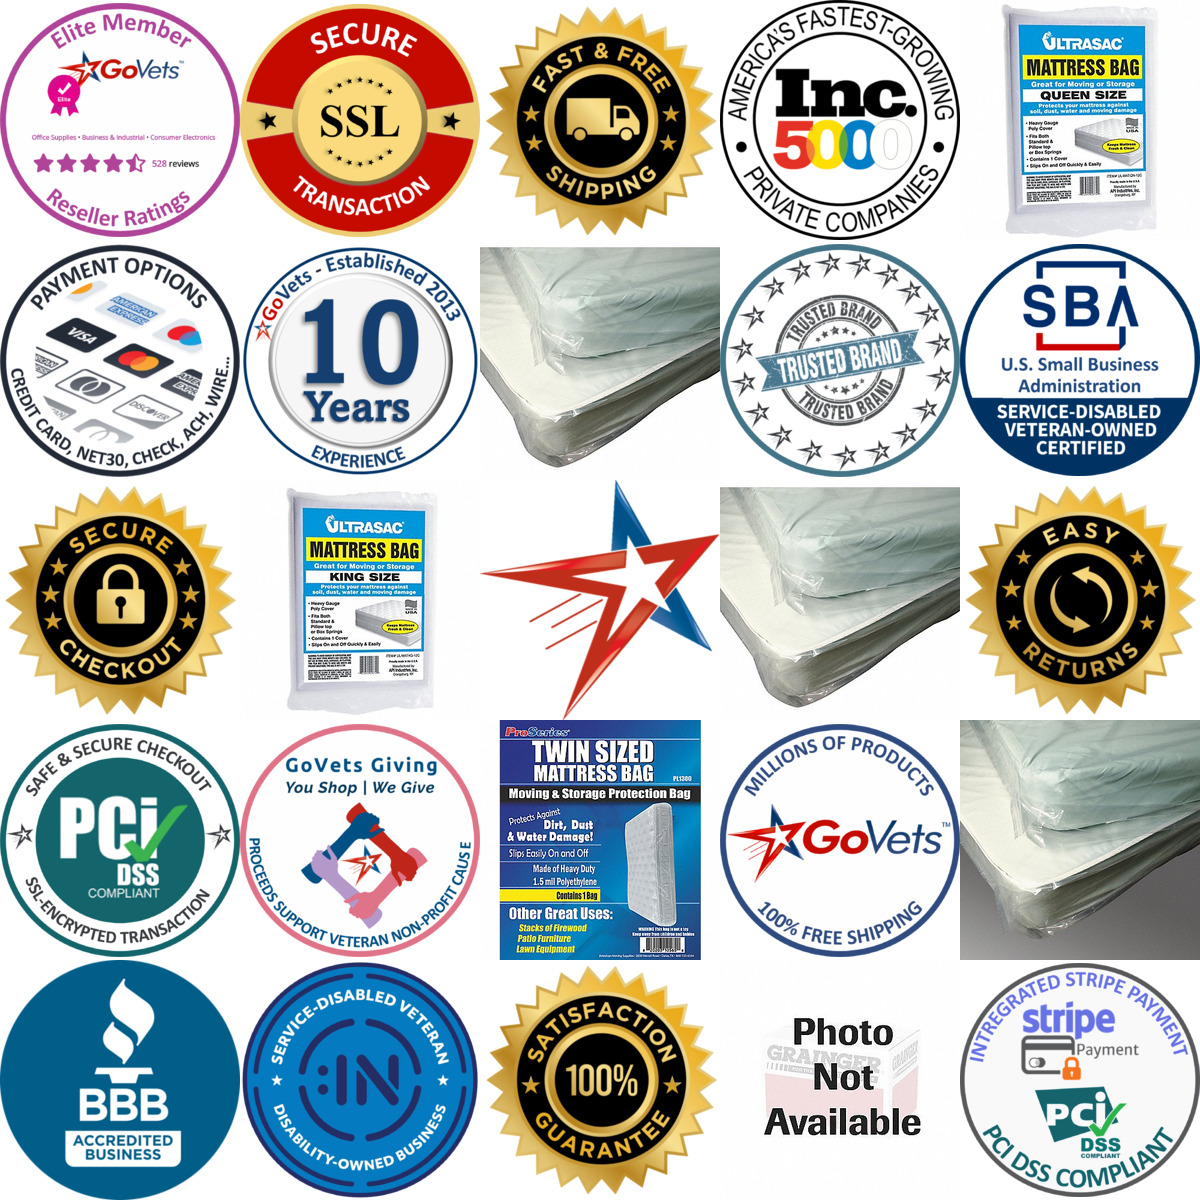 A selection of Mattress Bags products on GoVets